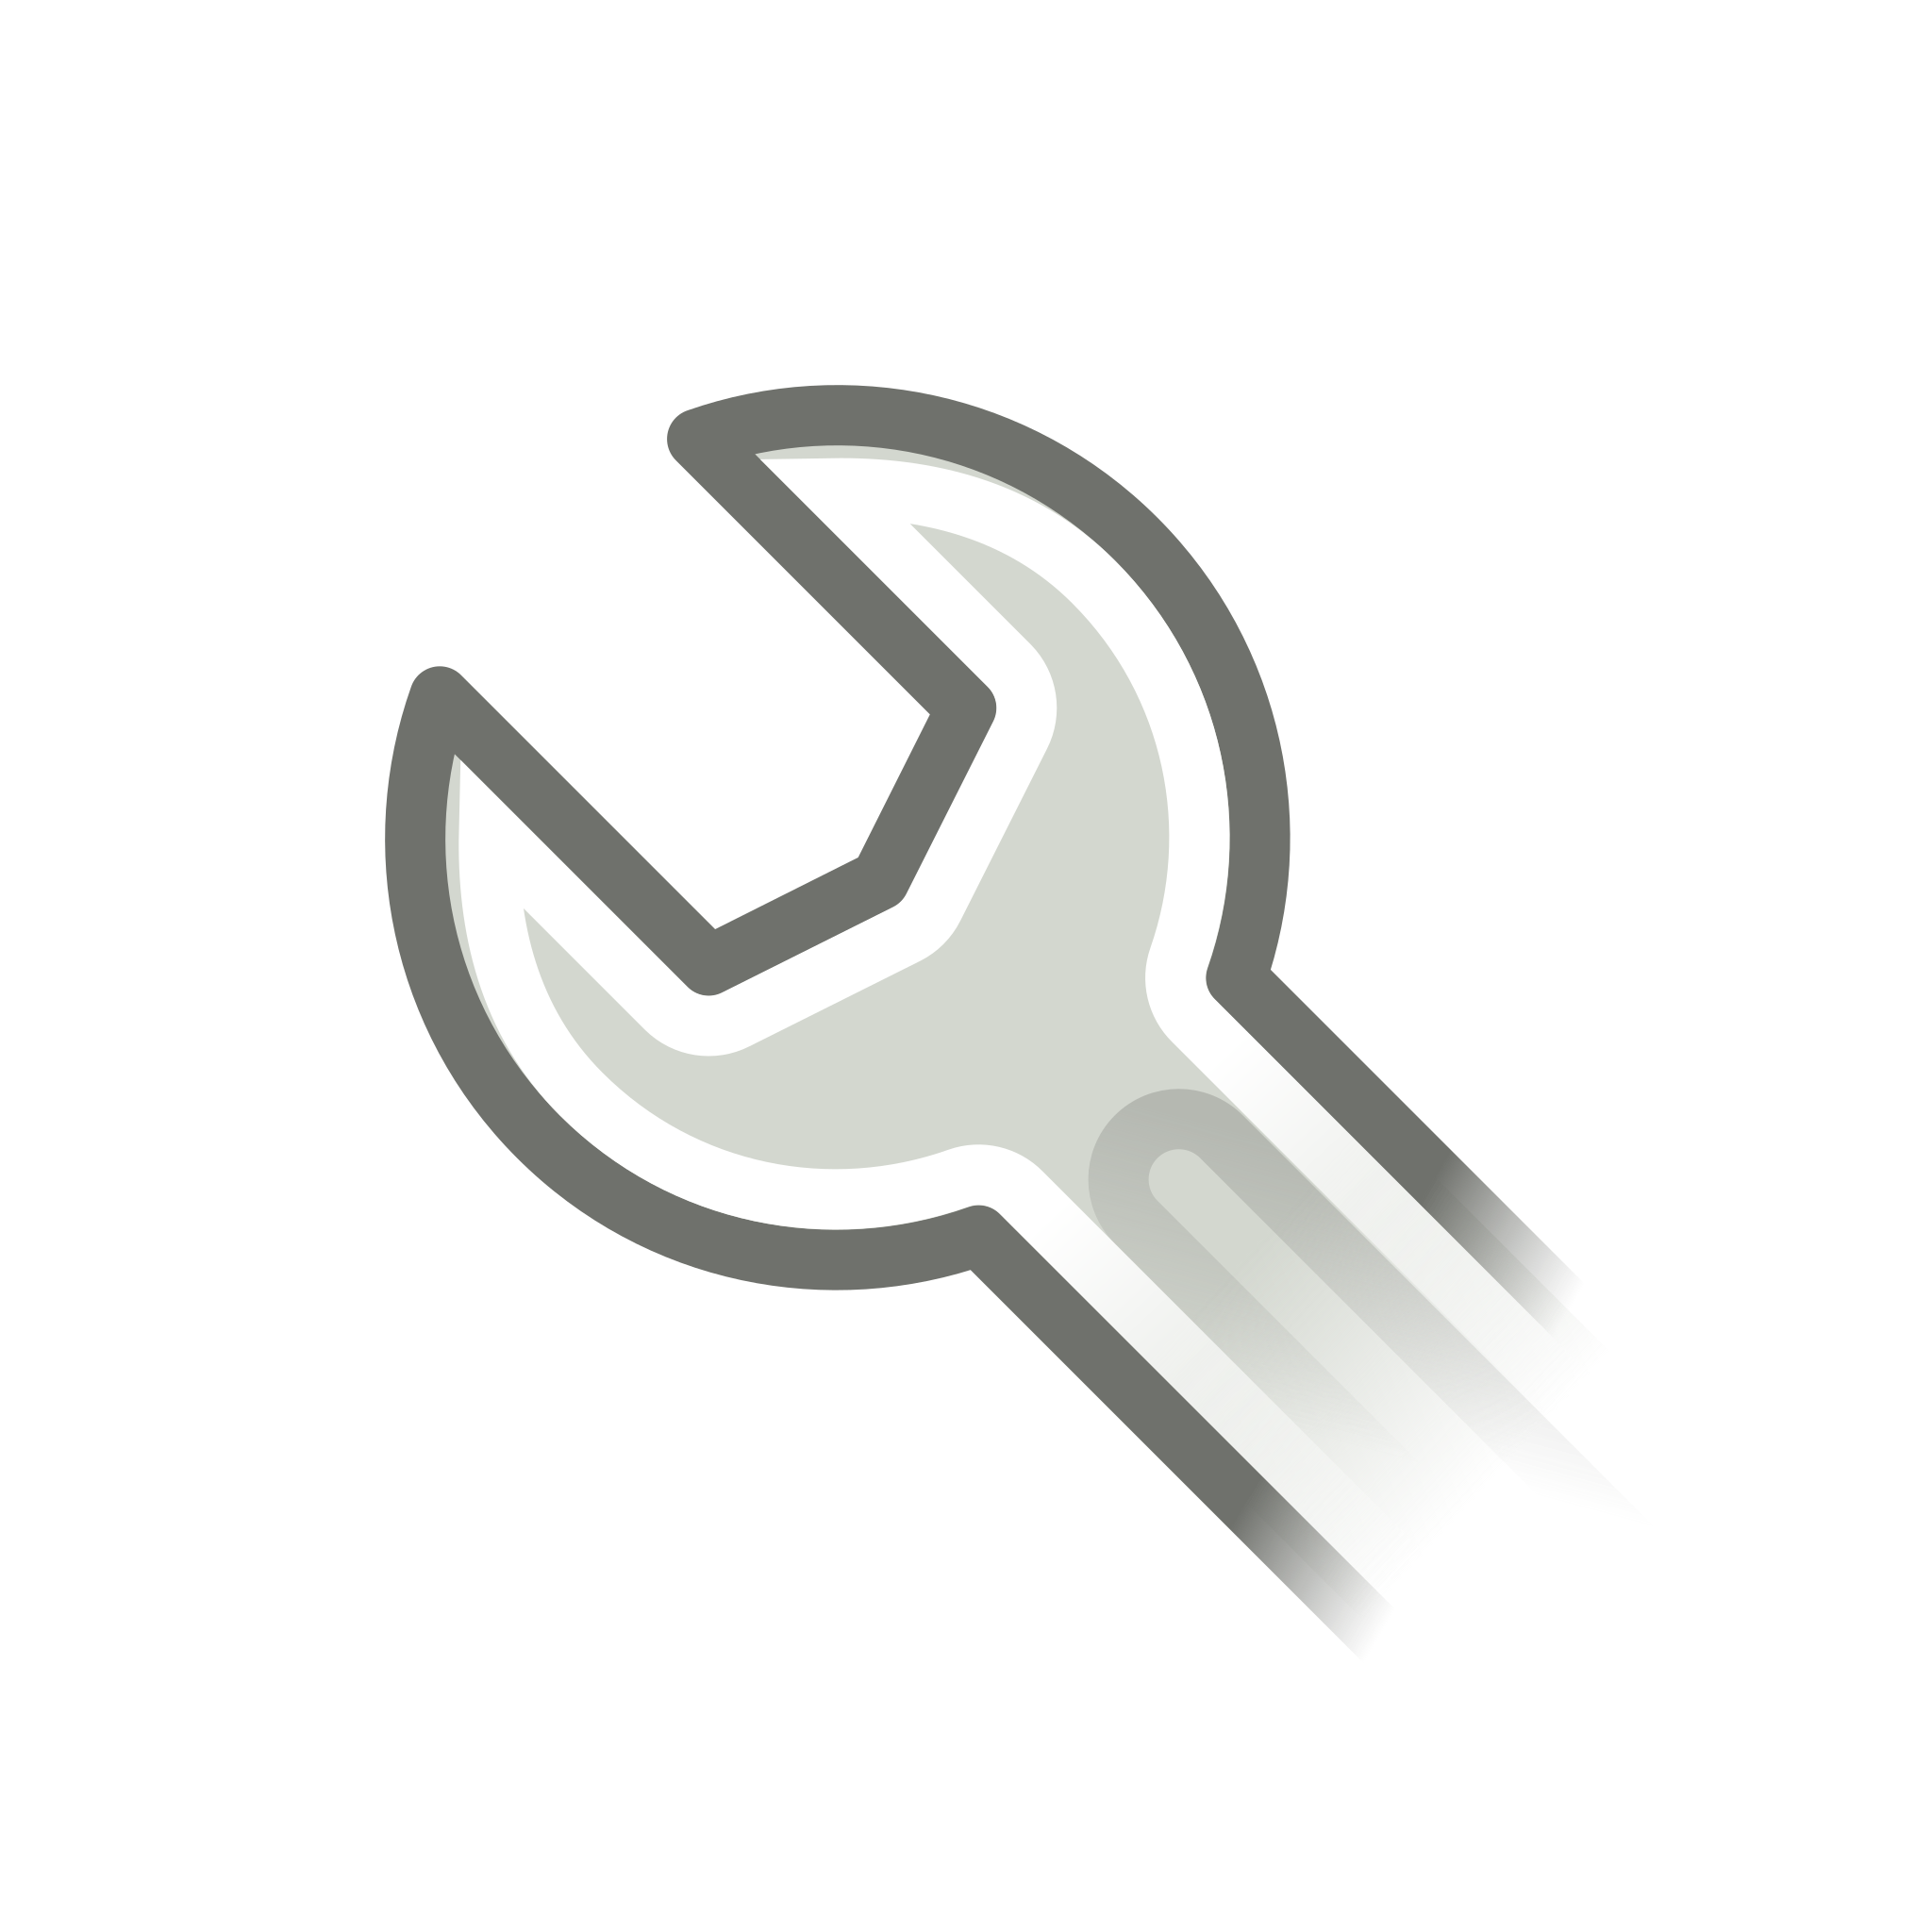 File with a wrench icon